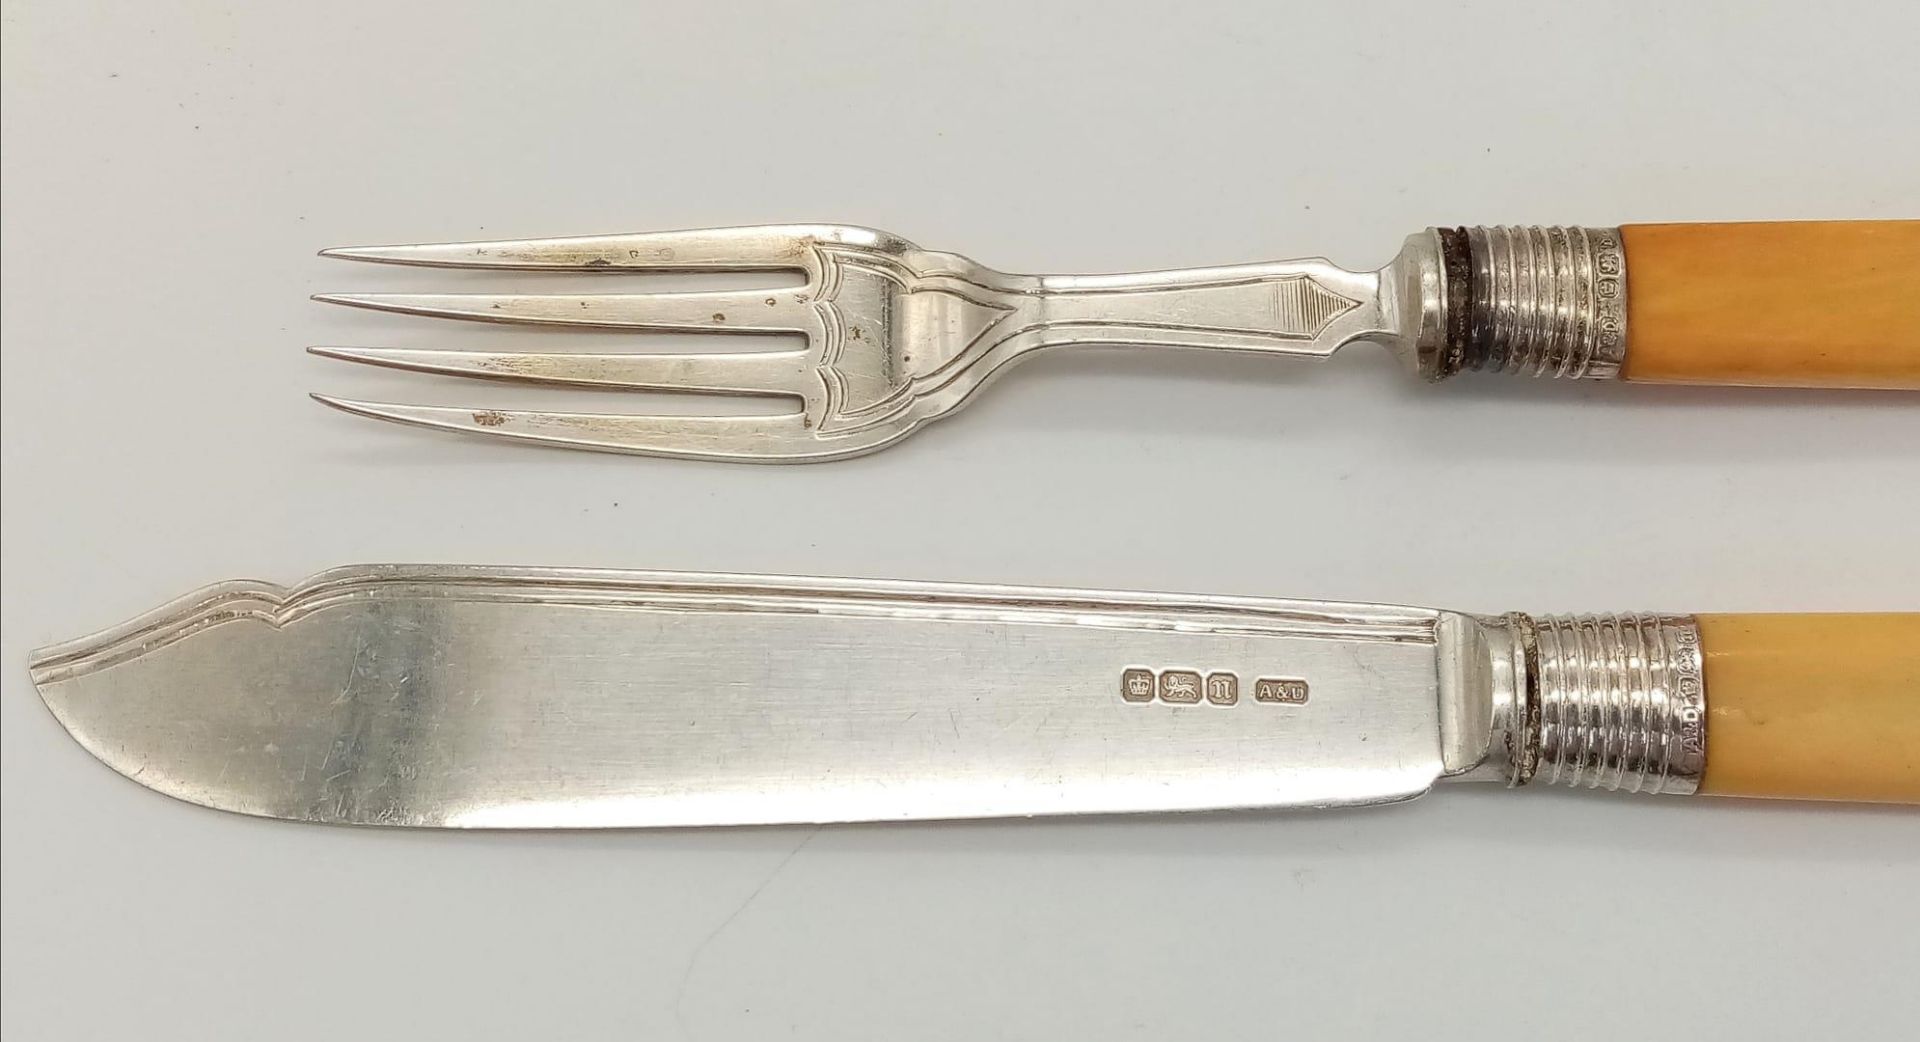 A Set of 13 Antique Sterling Silver Fish Knives and Forks. Bone handles. Hallmarks for Sheffield - Image 2 of 4